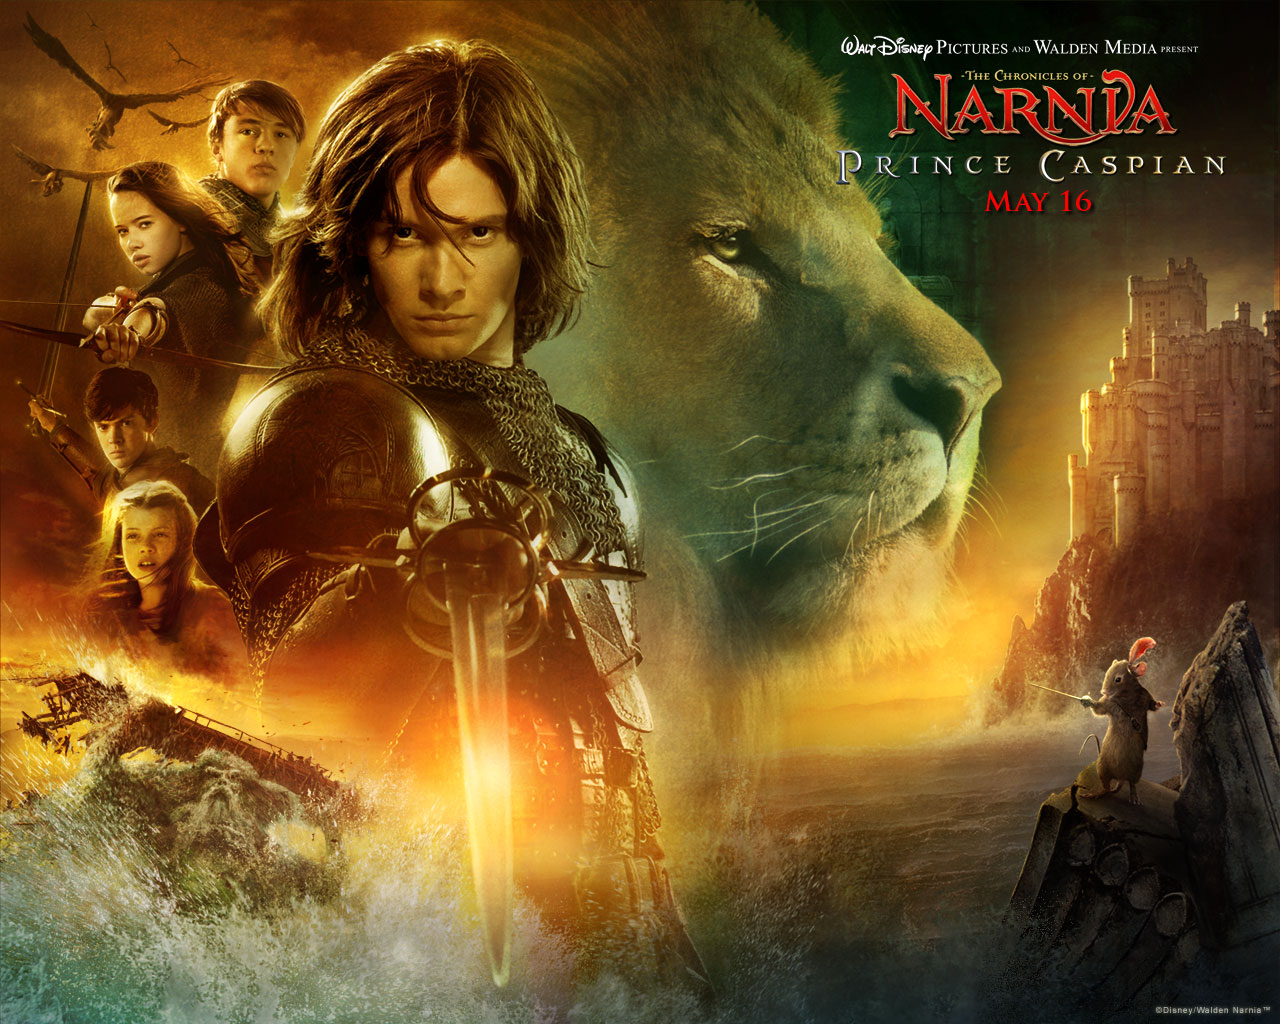 Download HQ The Chronicles of Narnia Prince Caspian wallpaper / Movies / 1280x1024